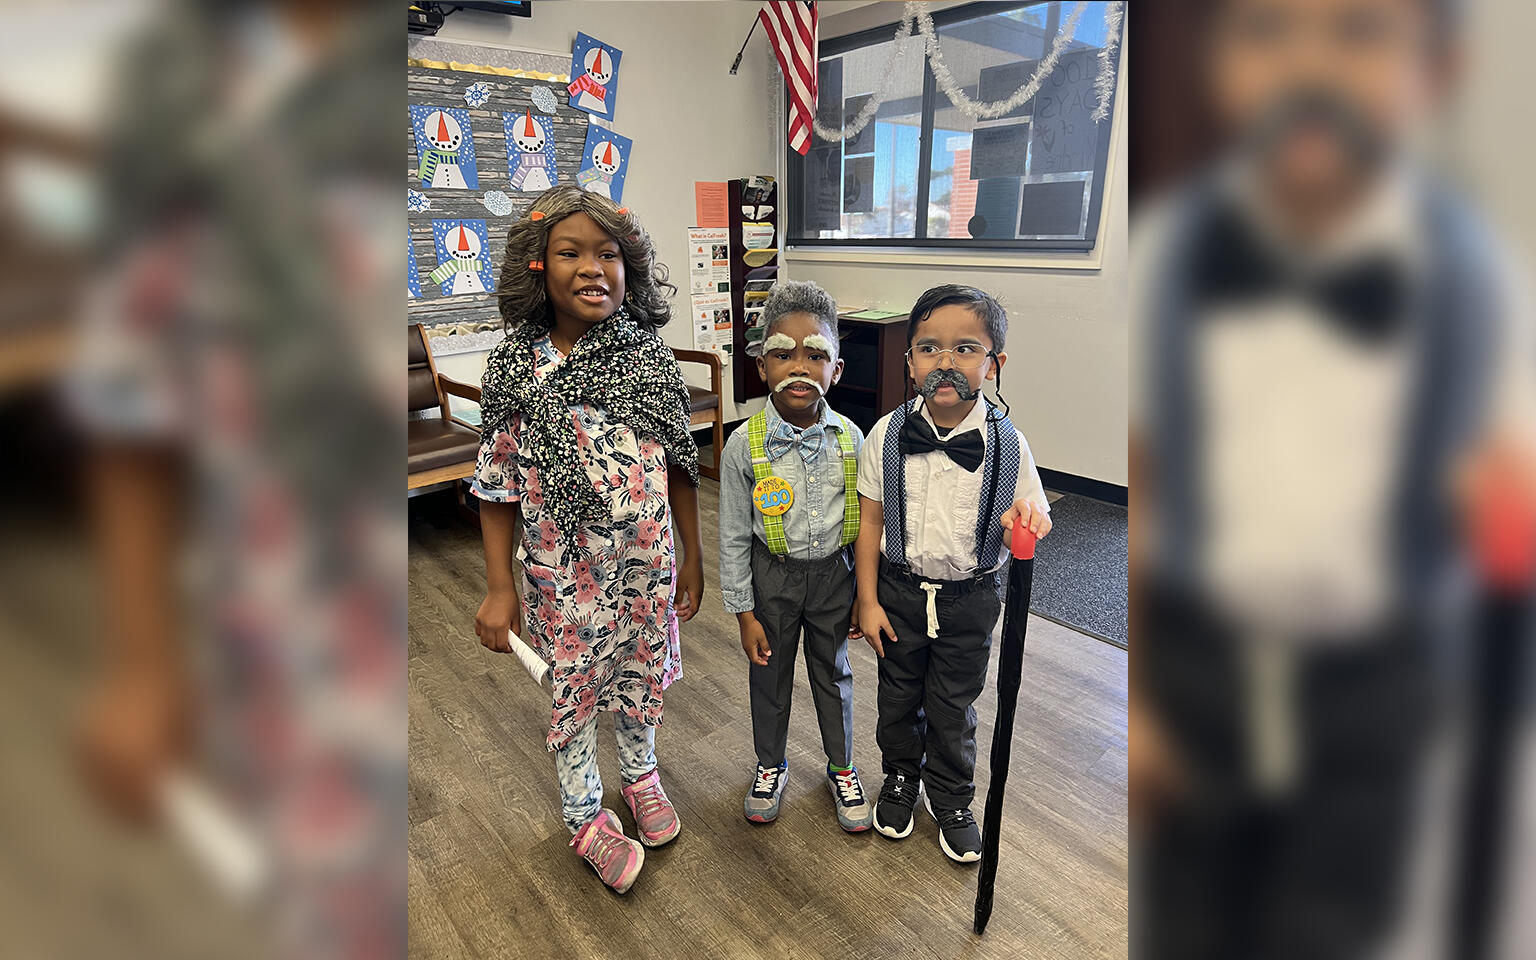 Celebrating 100 Days of School with our adorable "viejitos"!